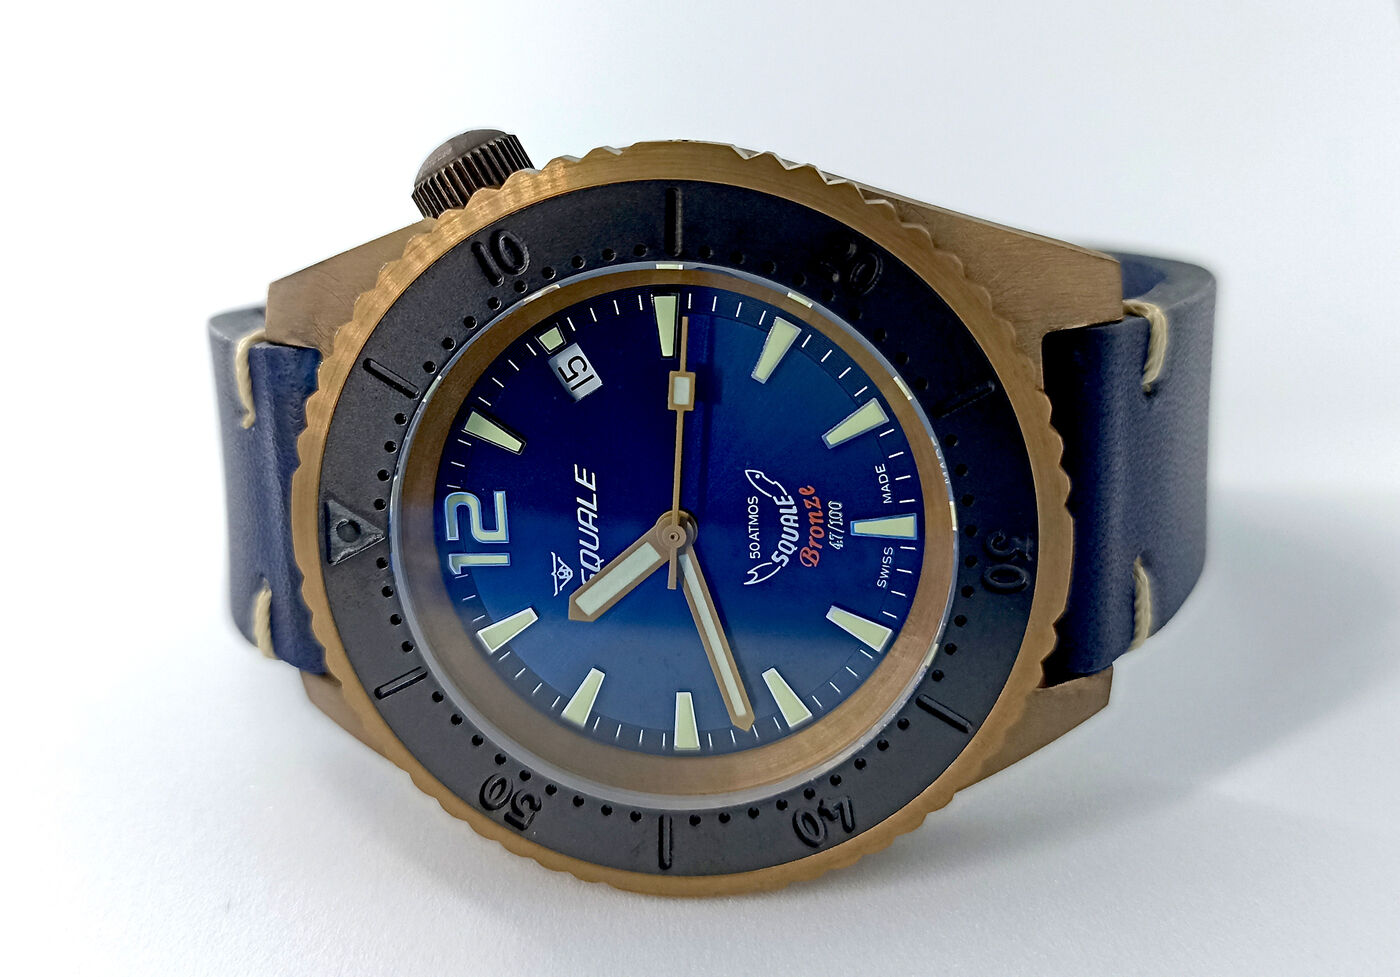 Squale 50 atmos 1521 Bronze Blue Dive Watch